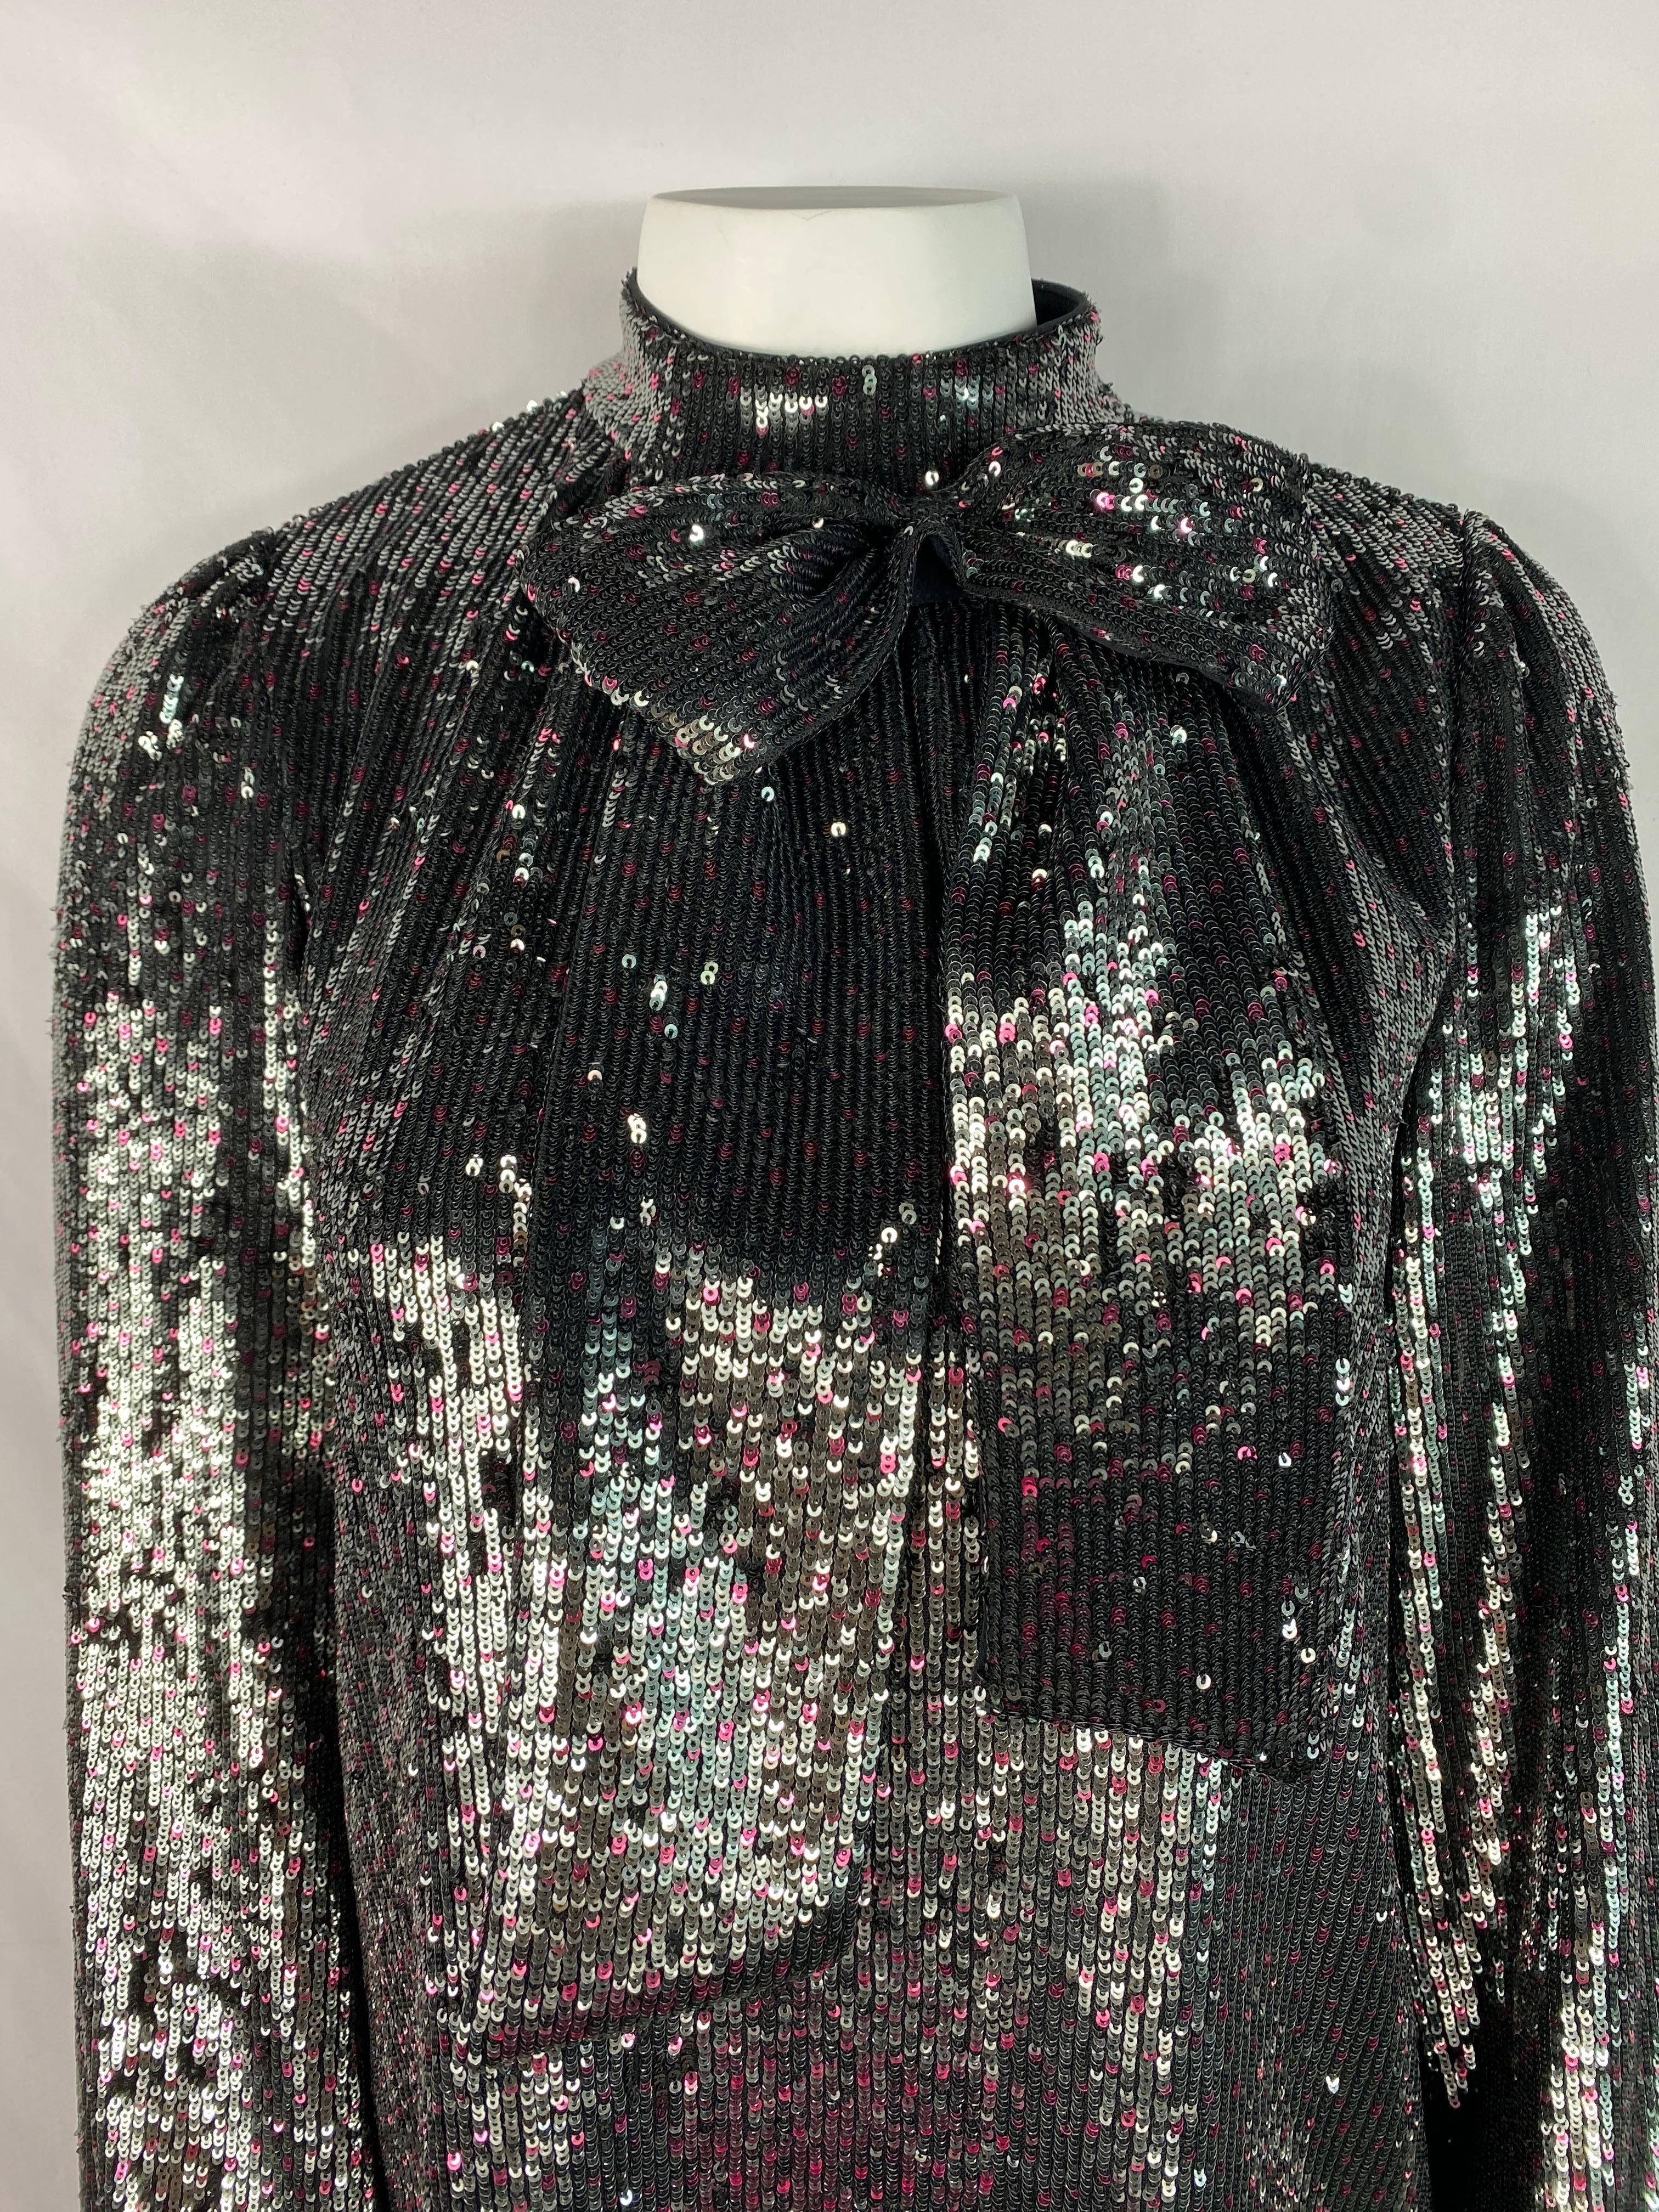 Product details:

Shiny grey and pink sequin mini dress designed by Italian company No. 21. The dress features, low turtle neck with large bow detail and rear three button closure.
Made in Italy.